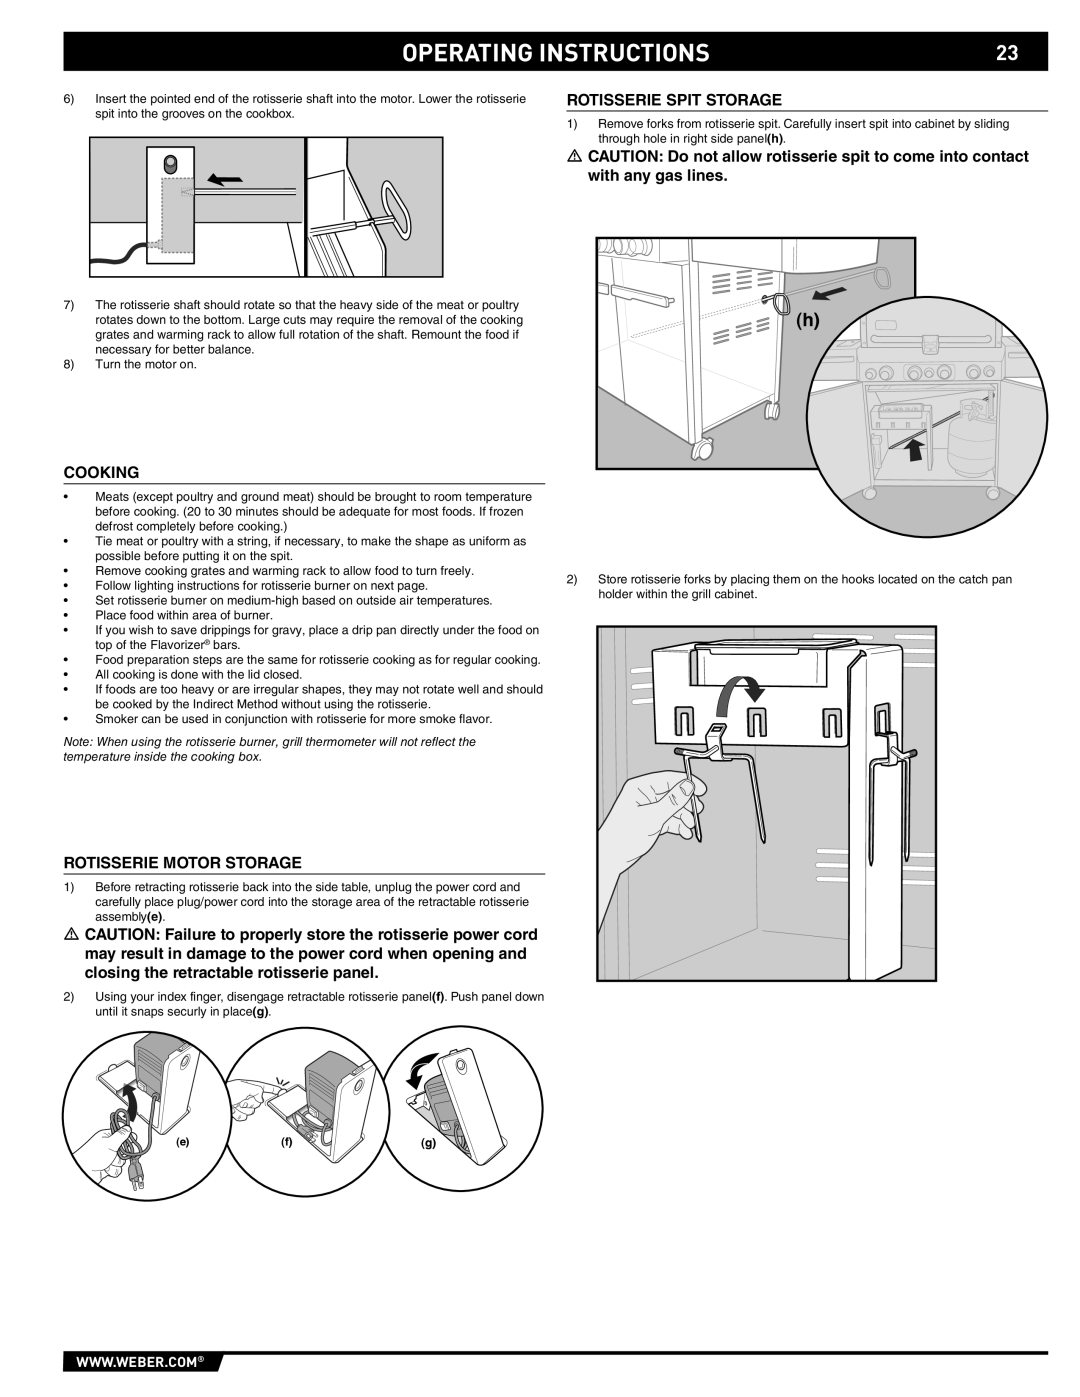 Summit 89190 manual Operating Instructions, Rotisserie Spit Storage, Cooking, Rotisserie Motor Storage 